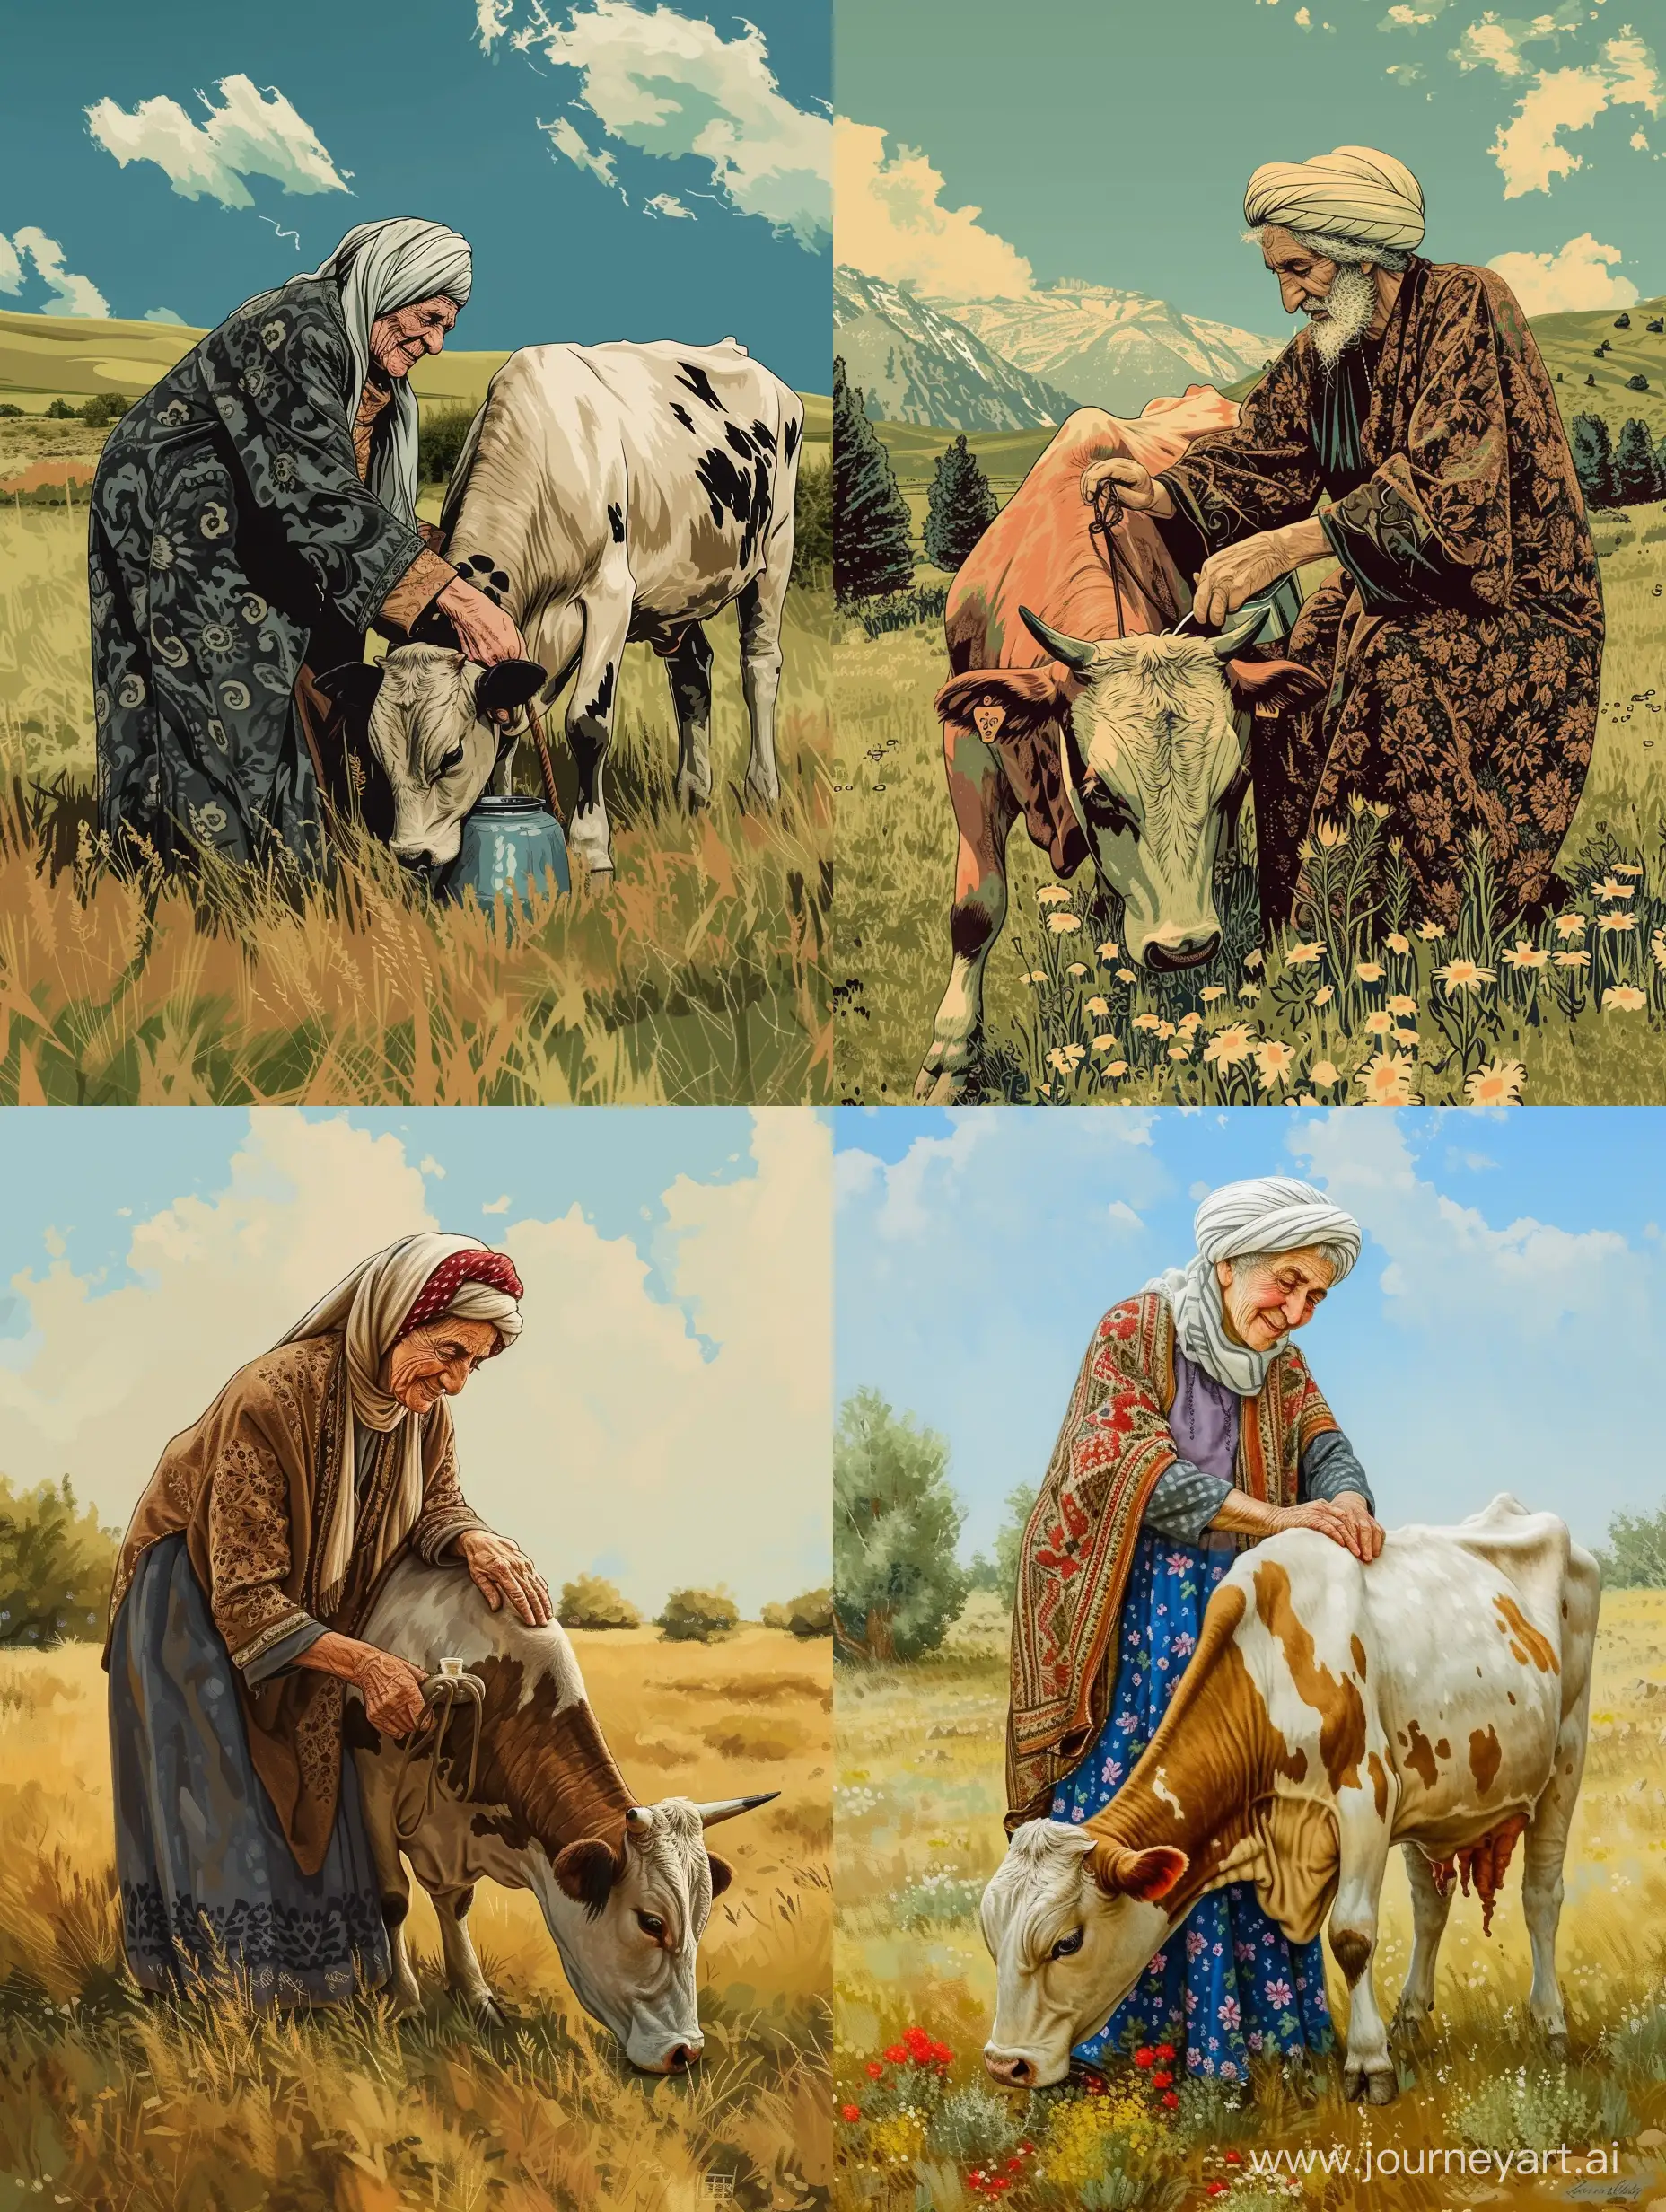 an iranian old woman in traditional clothing  milking a cow in the middle of a field in old style illustration, detailed, cs 5:7, 